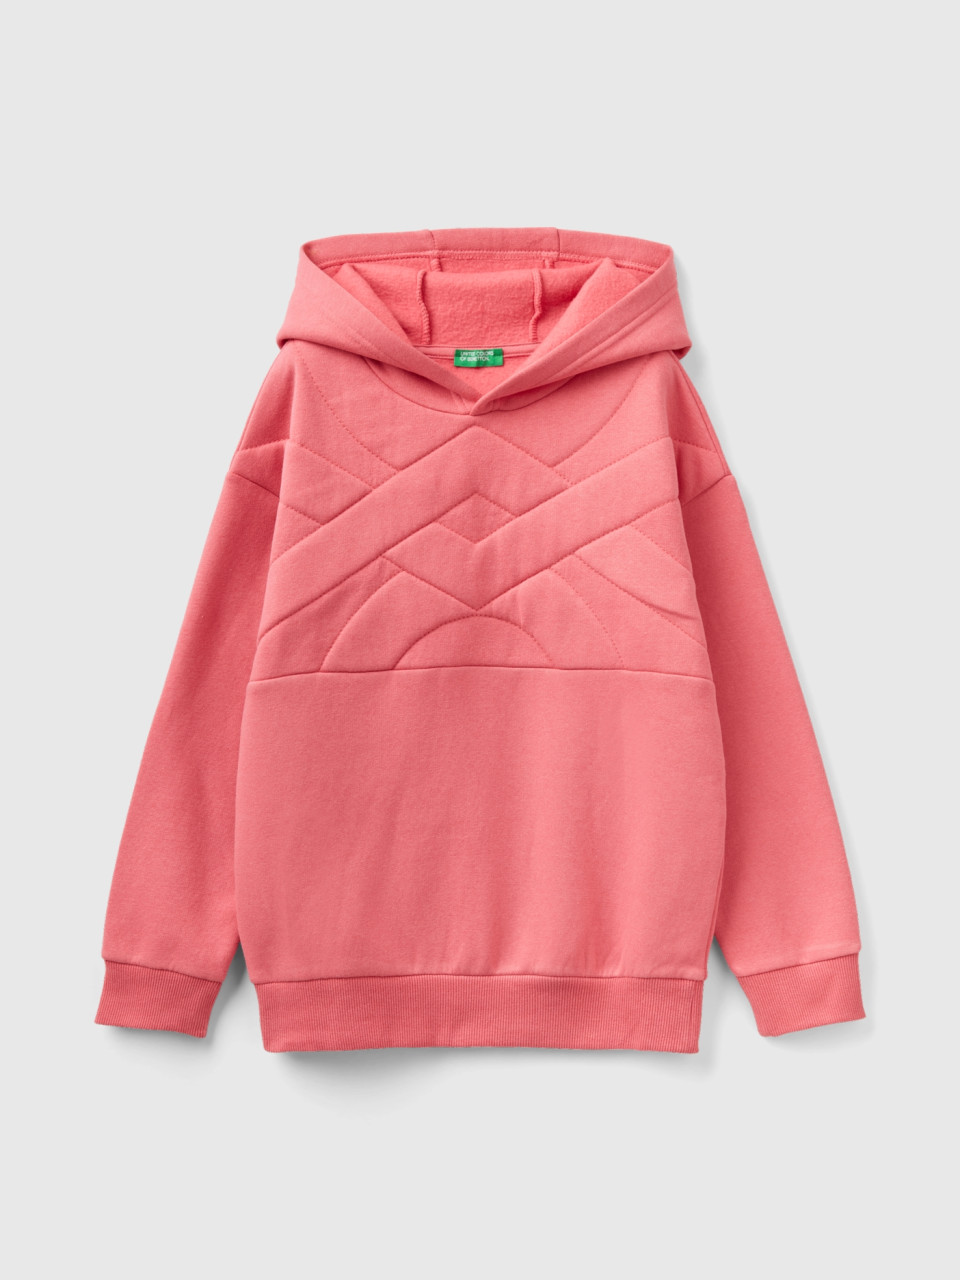 Benetton, Sweatshirt With Logo In Recycled Fabric, Pink, Kids